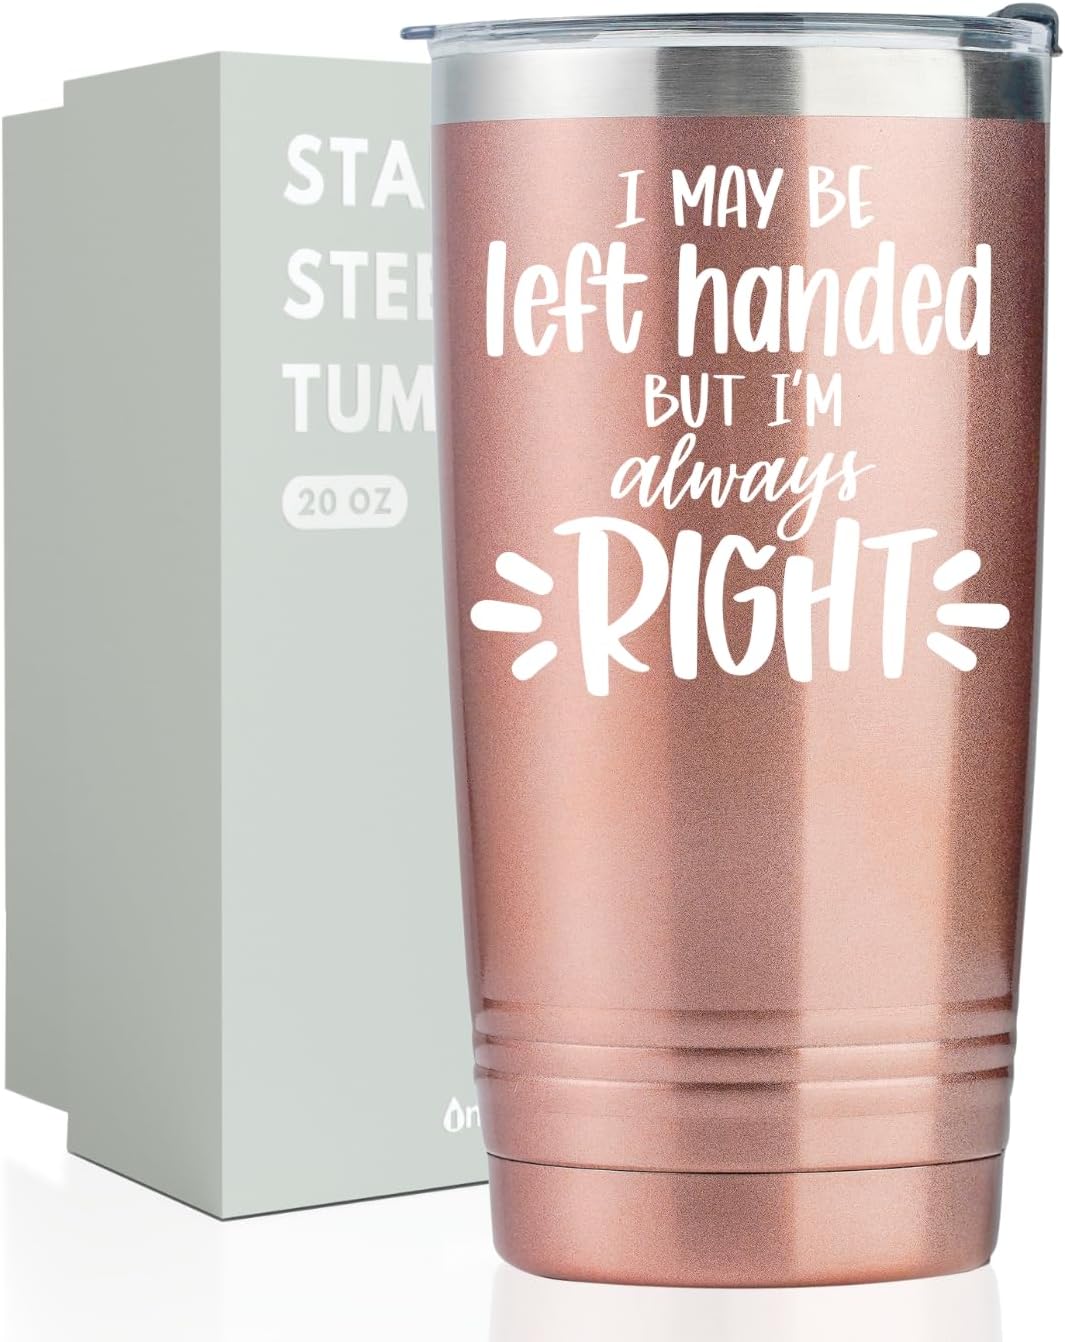 Onebttl Left Handed Gifts Review